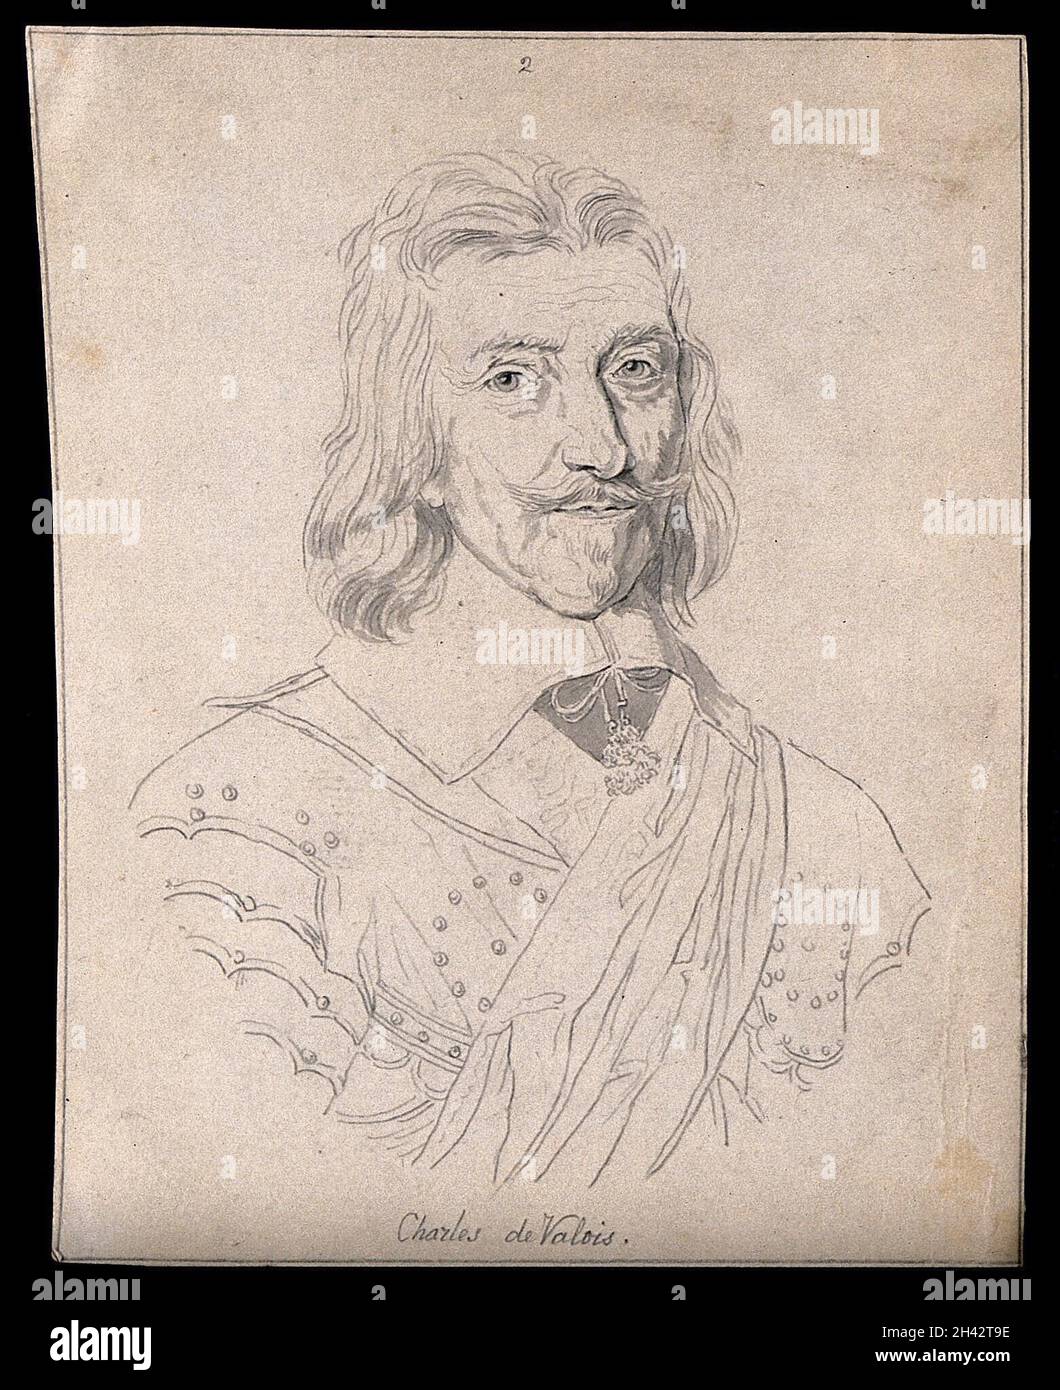 Charles de Valois, Duke of Angoulême. Drawing, c. 1793, after J. Morin. Stock Photo